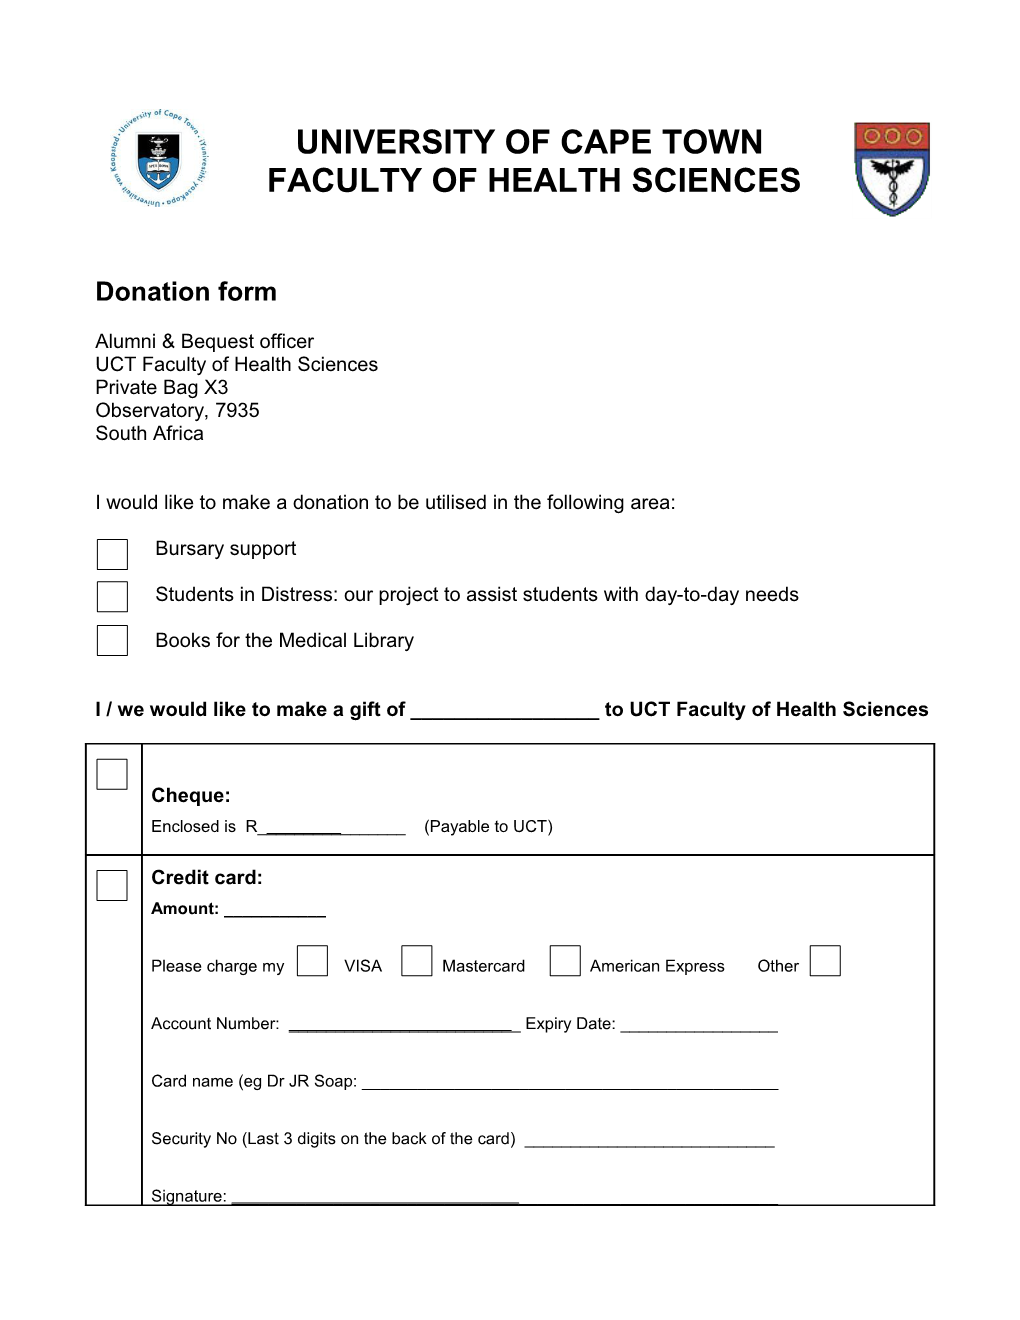 I / We Would Like to Make a Gift of ______To UCT Faculty of Health Sciences